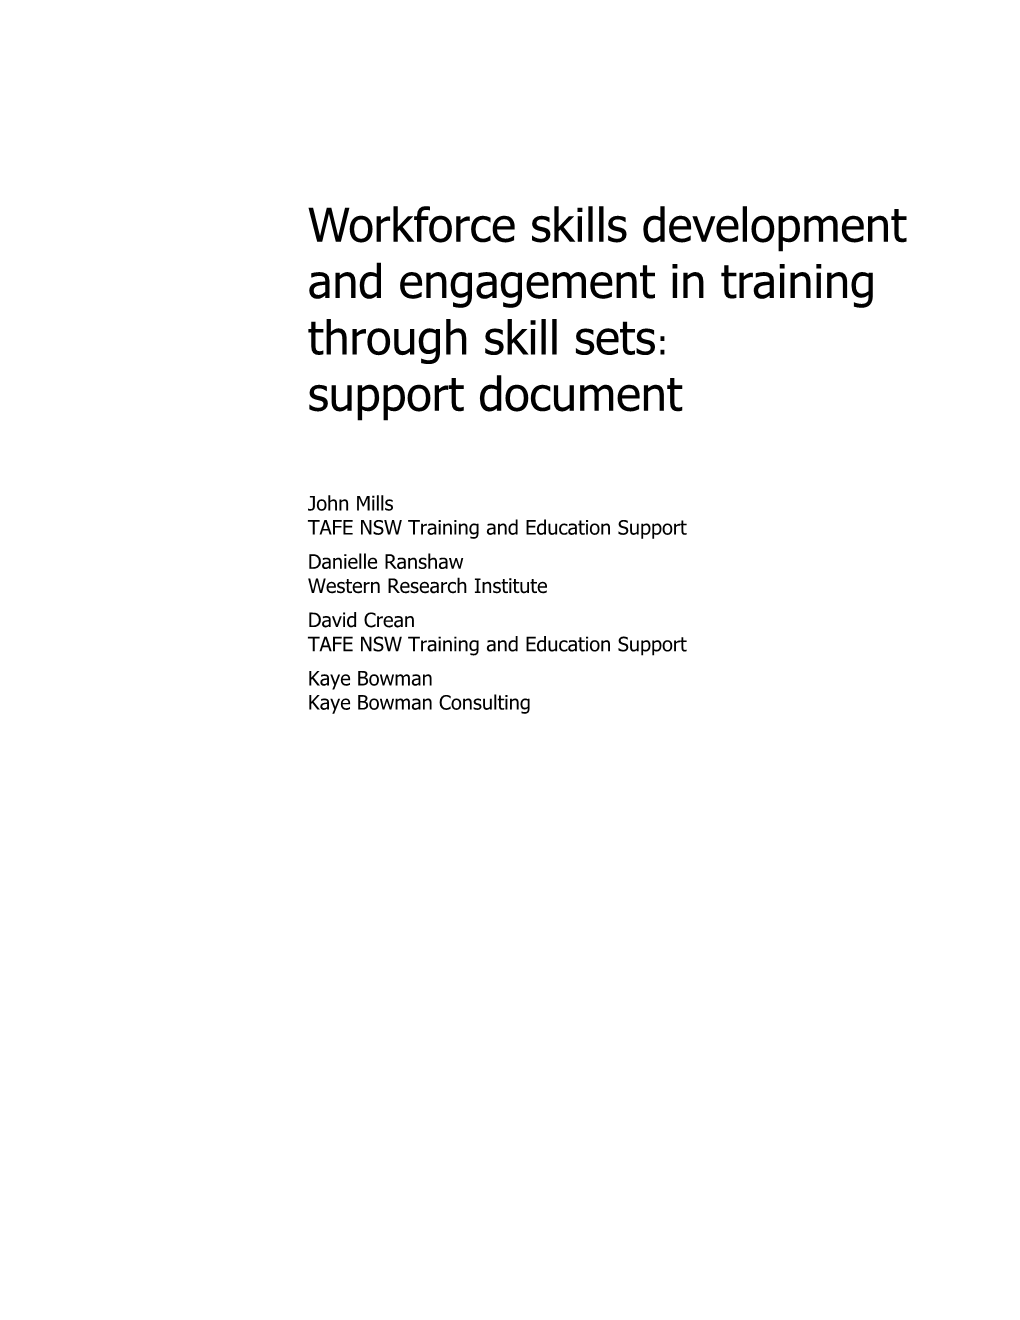 John Mills TAFE NSW Training and Education Support